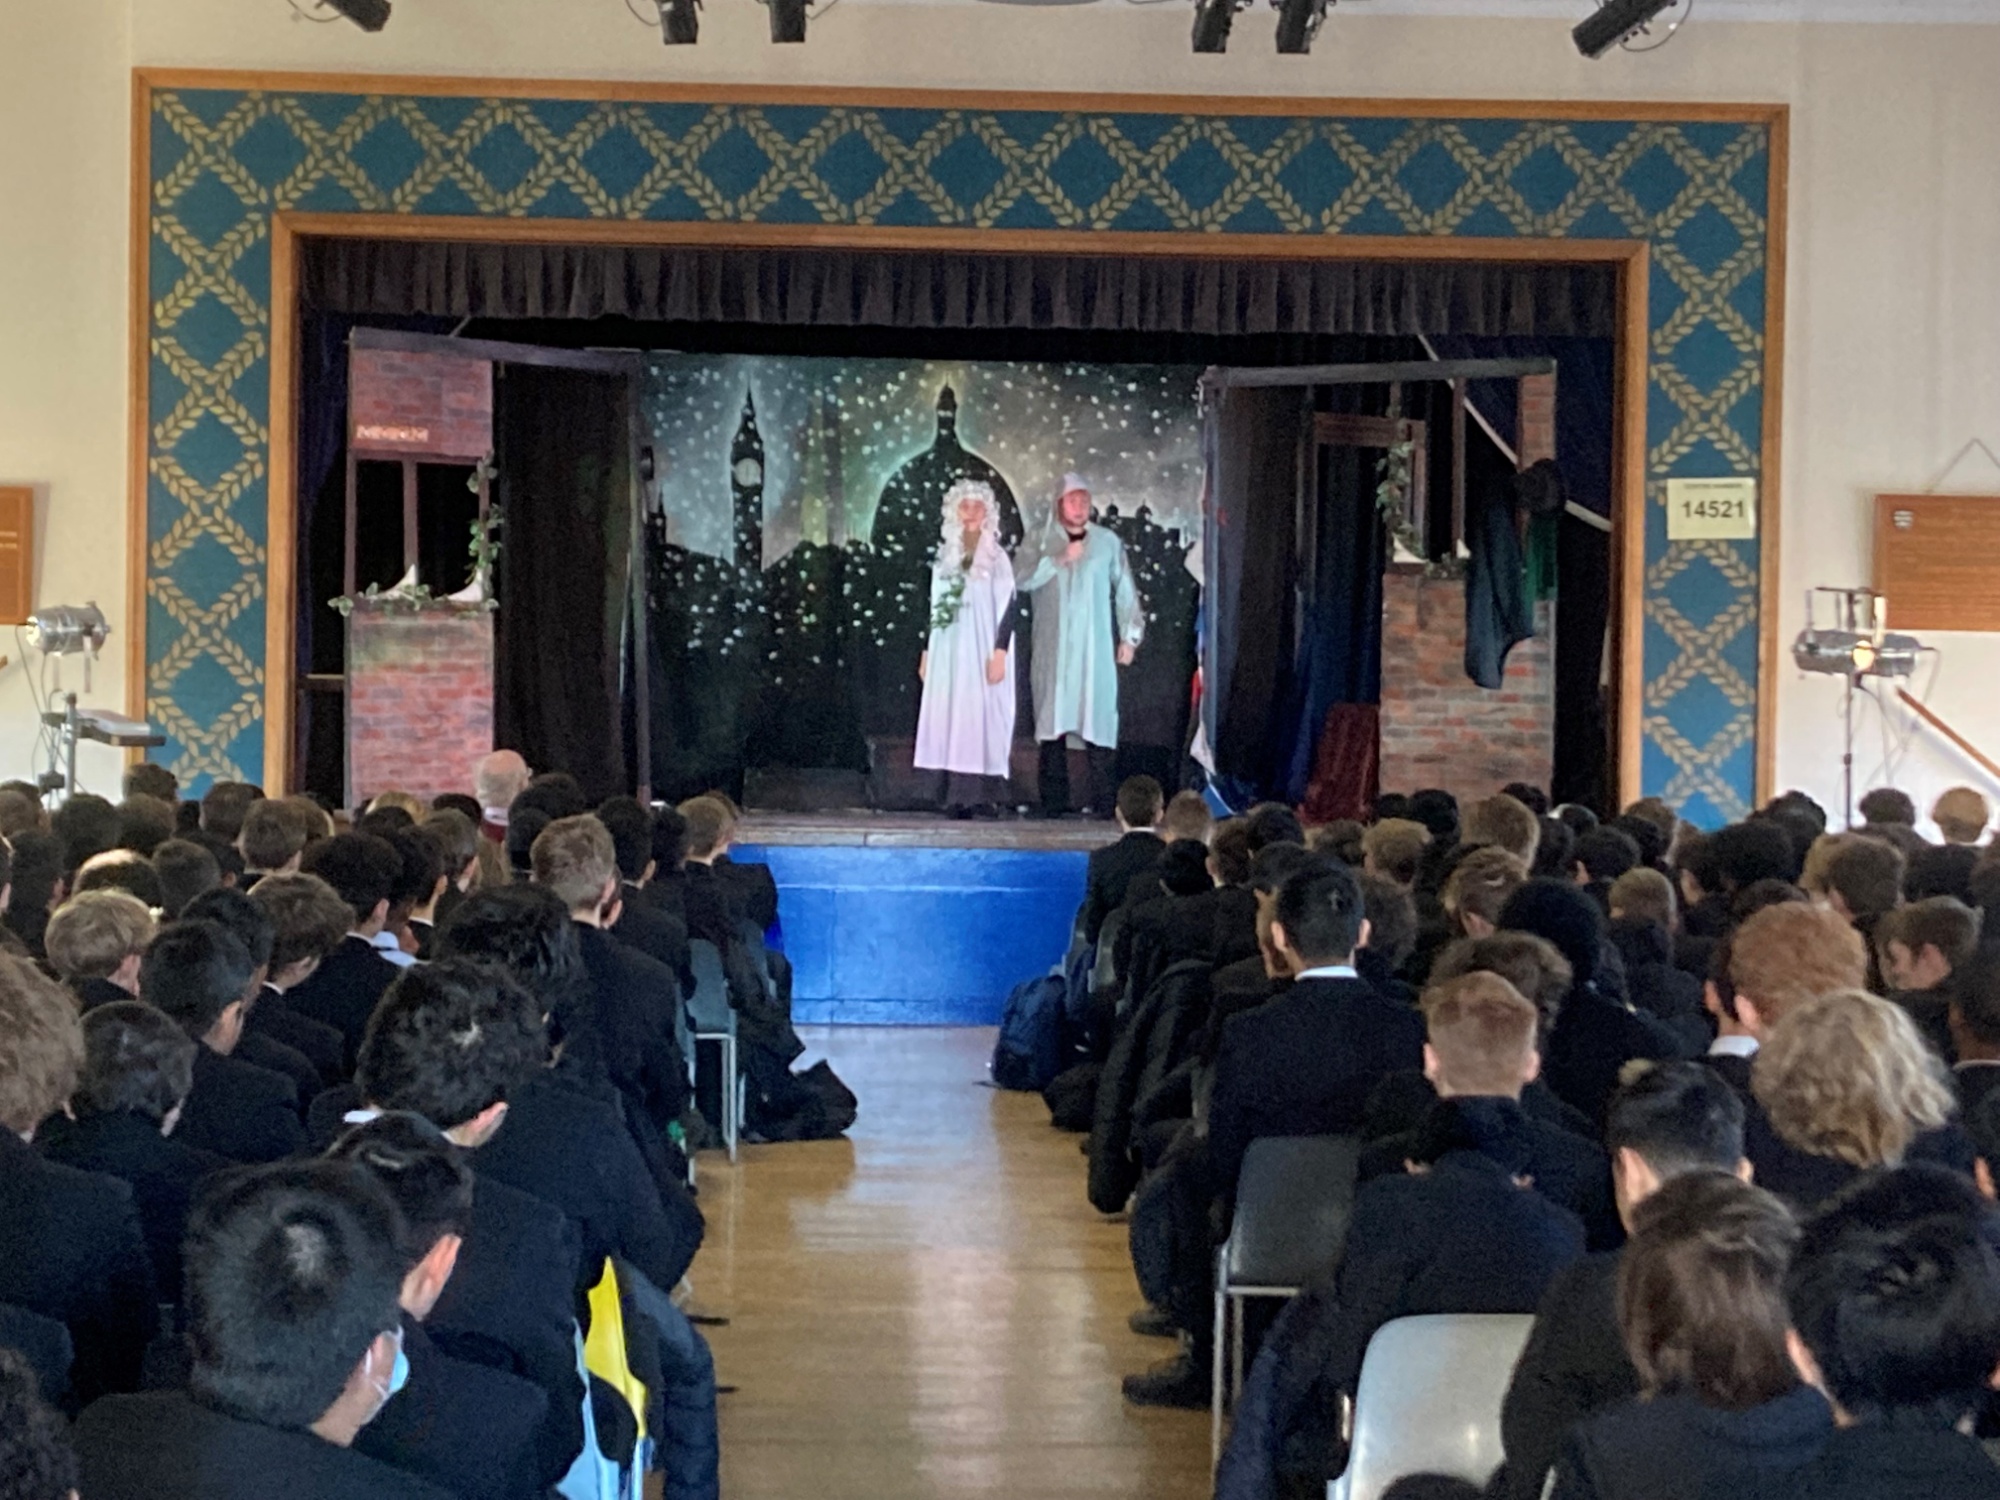 performance of a Christmas carol in the school hall